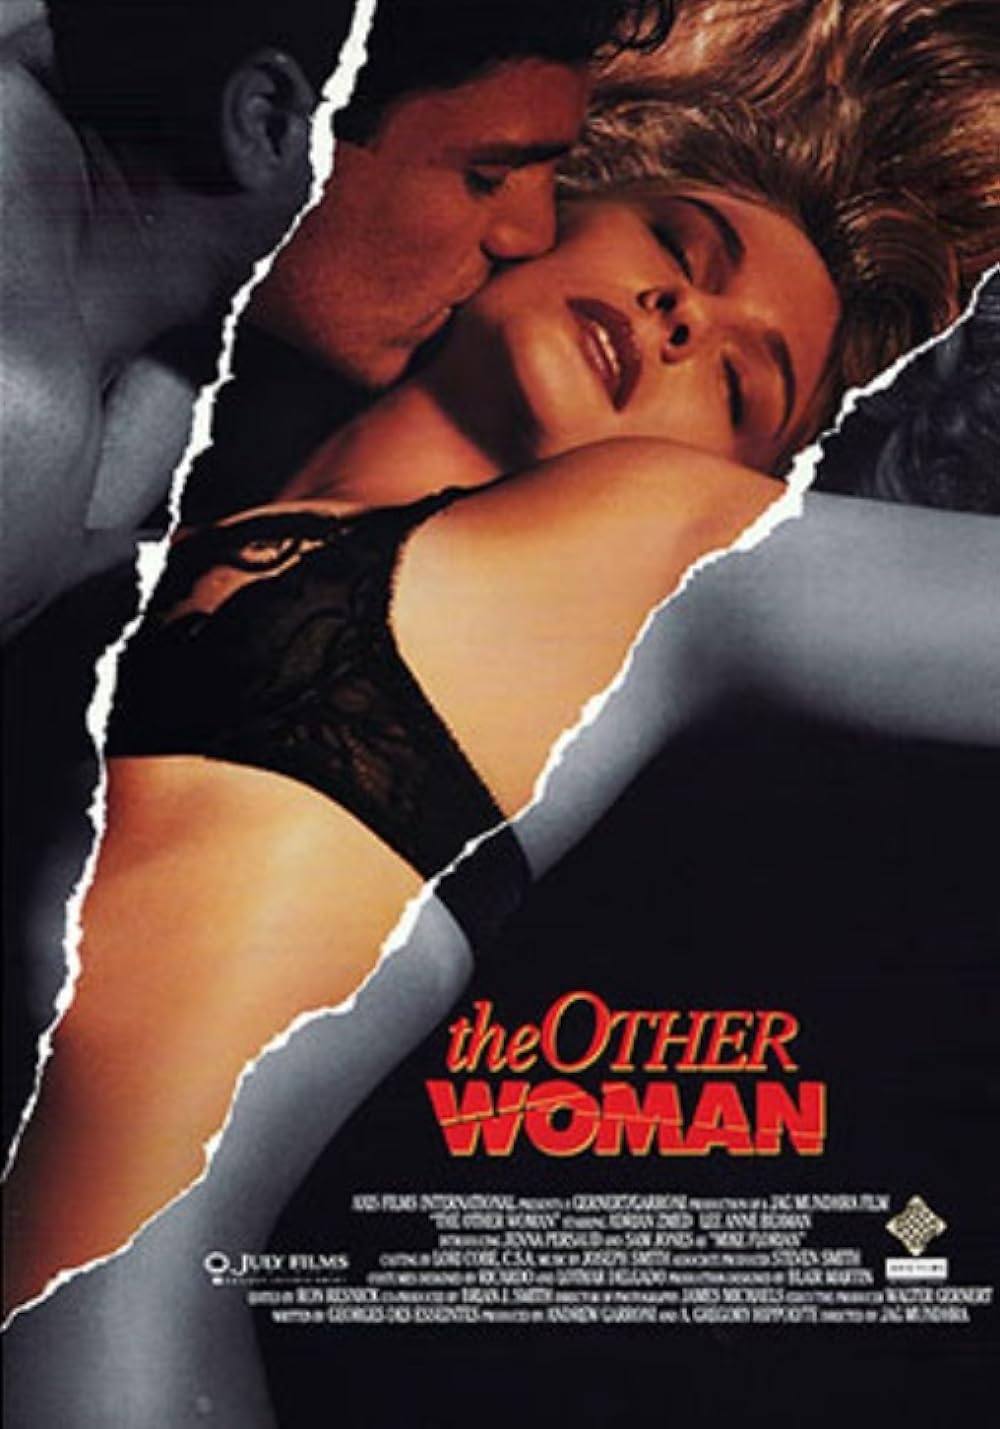 chelsea arbogast recommends the other woman movie 1992 pic